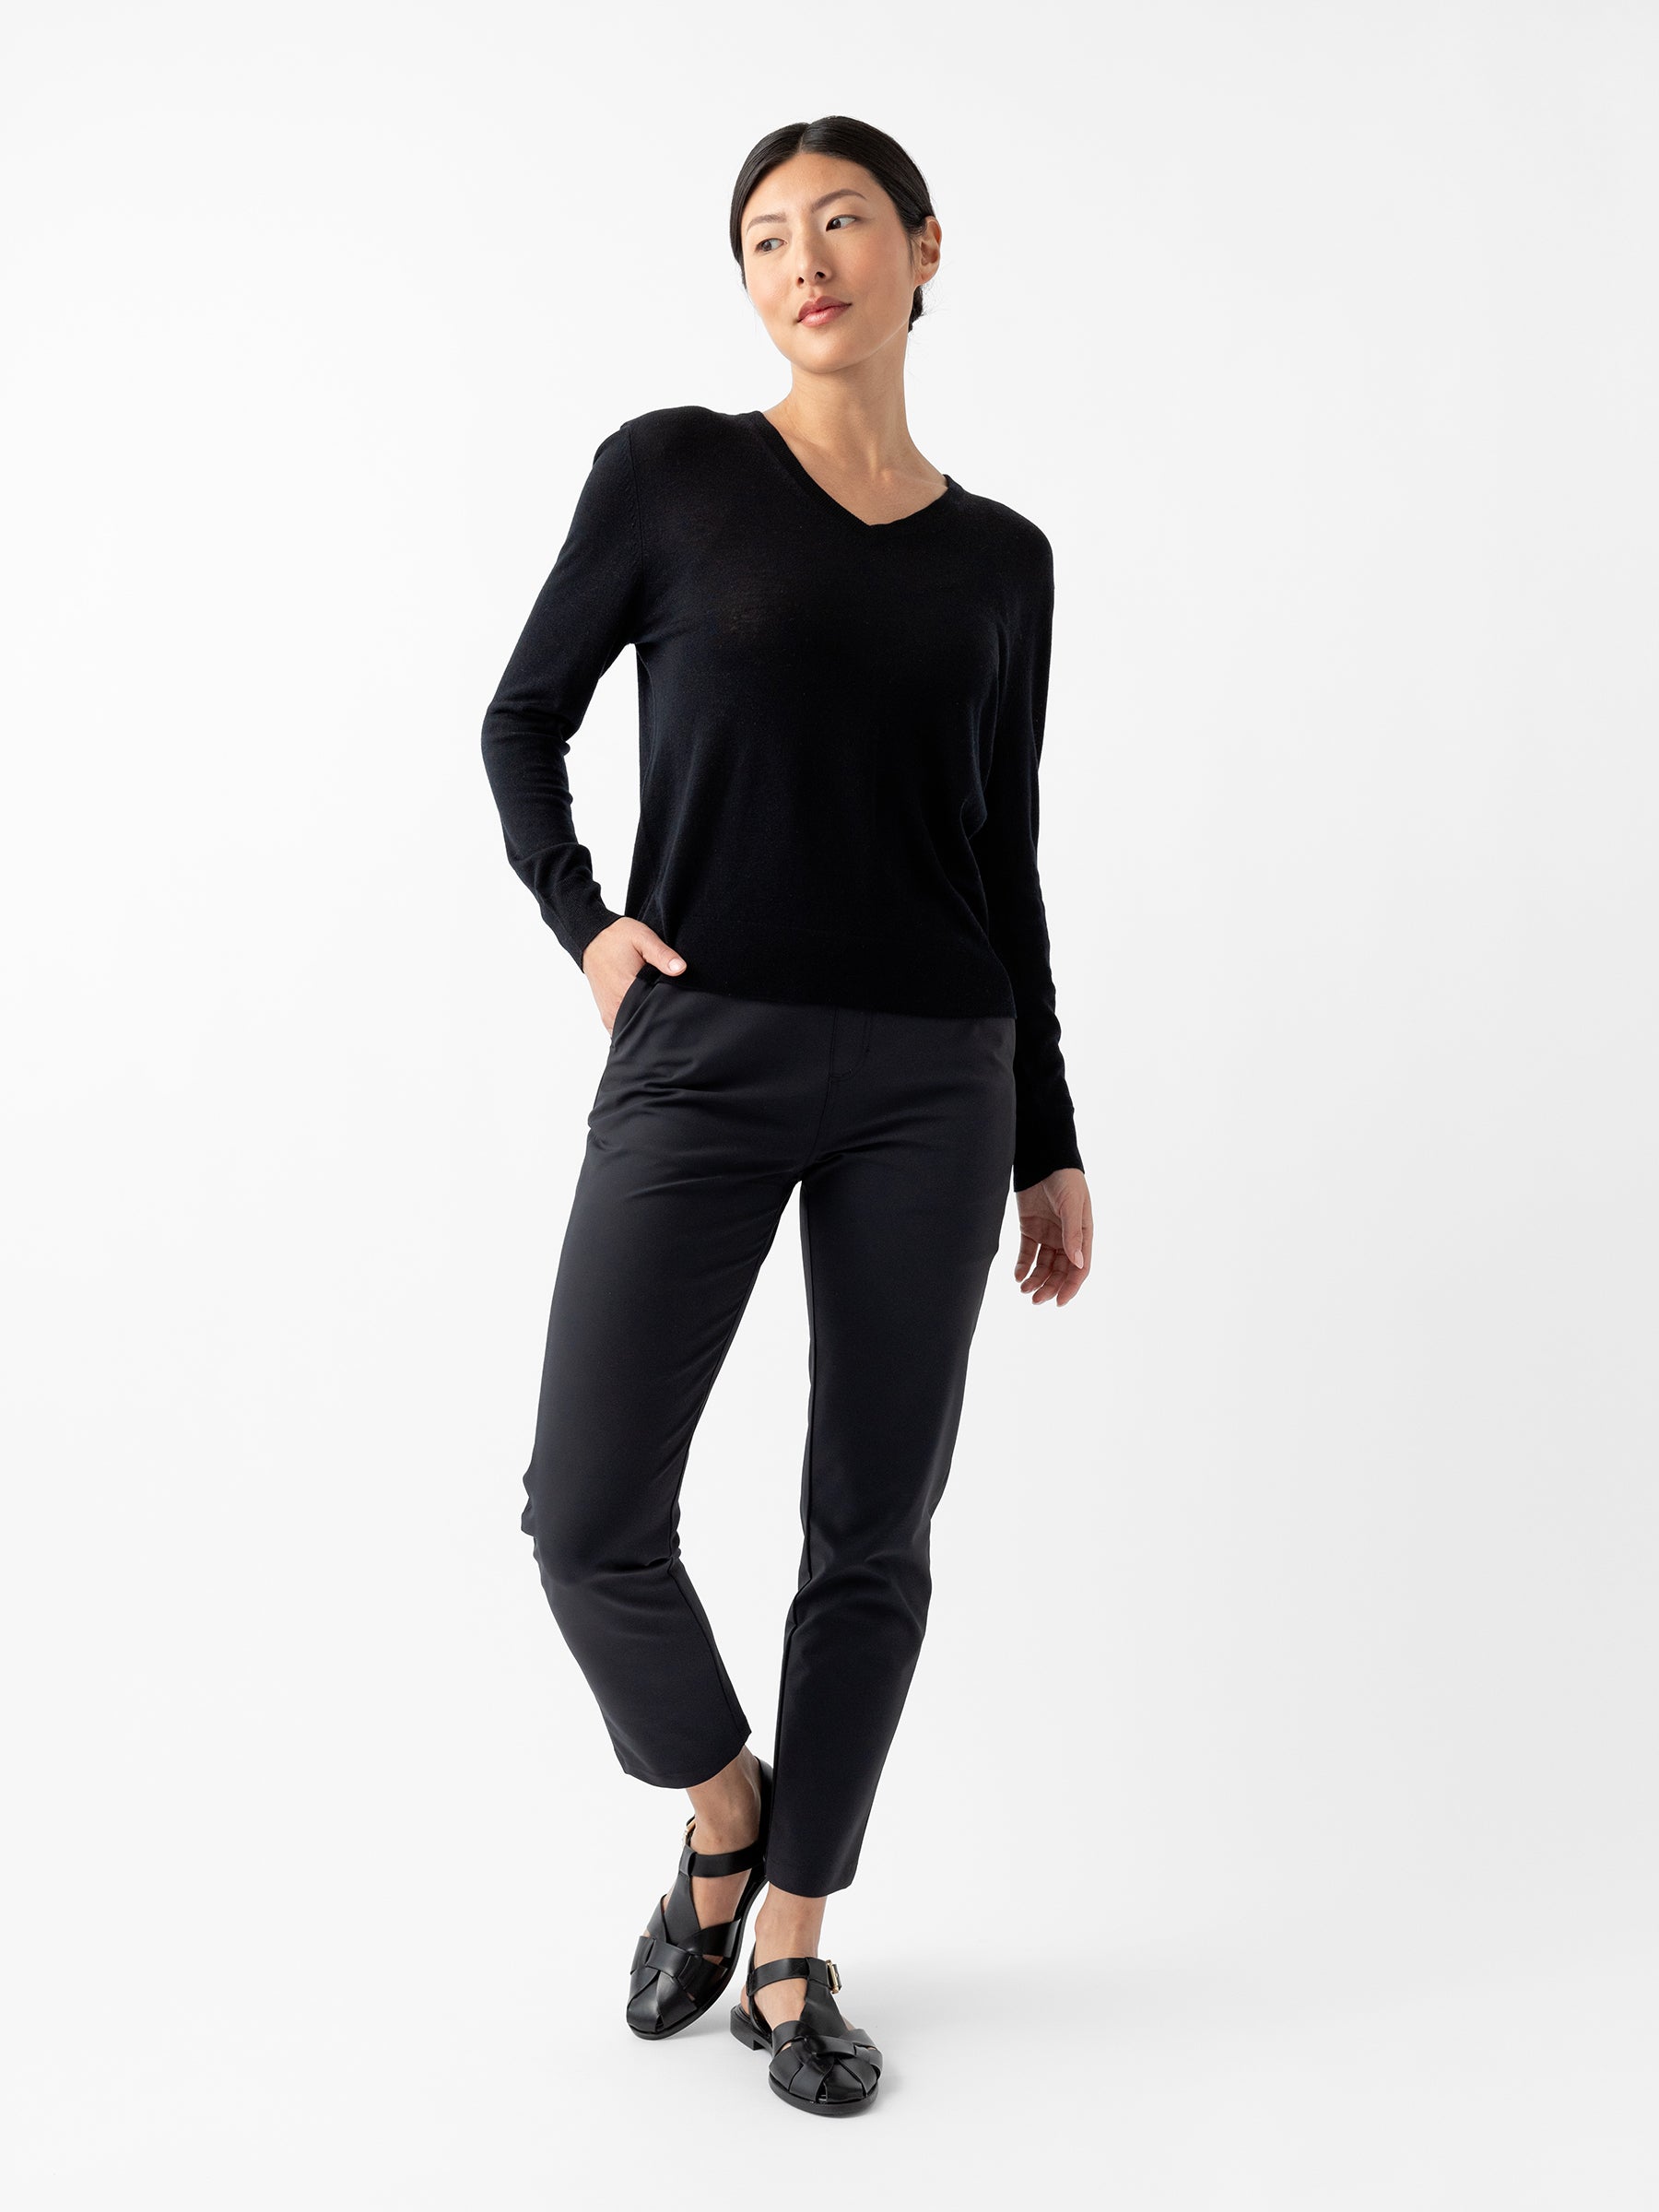 A person stands against a plain white background, dressed in Cozy Earth's Women's AirKnit V-Neck Sweater, black pants, and black shoes. They have one hand in their pocket and gaze slightly off-camera. The overall look is minimalist and chic. |Color:Jet Black